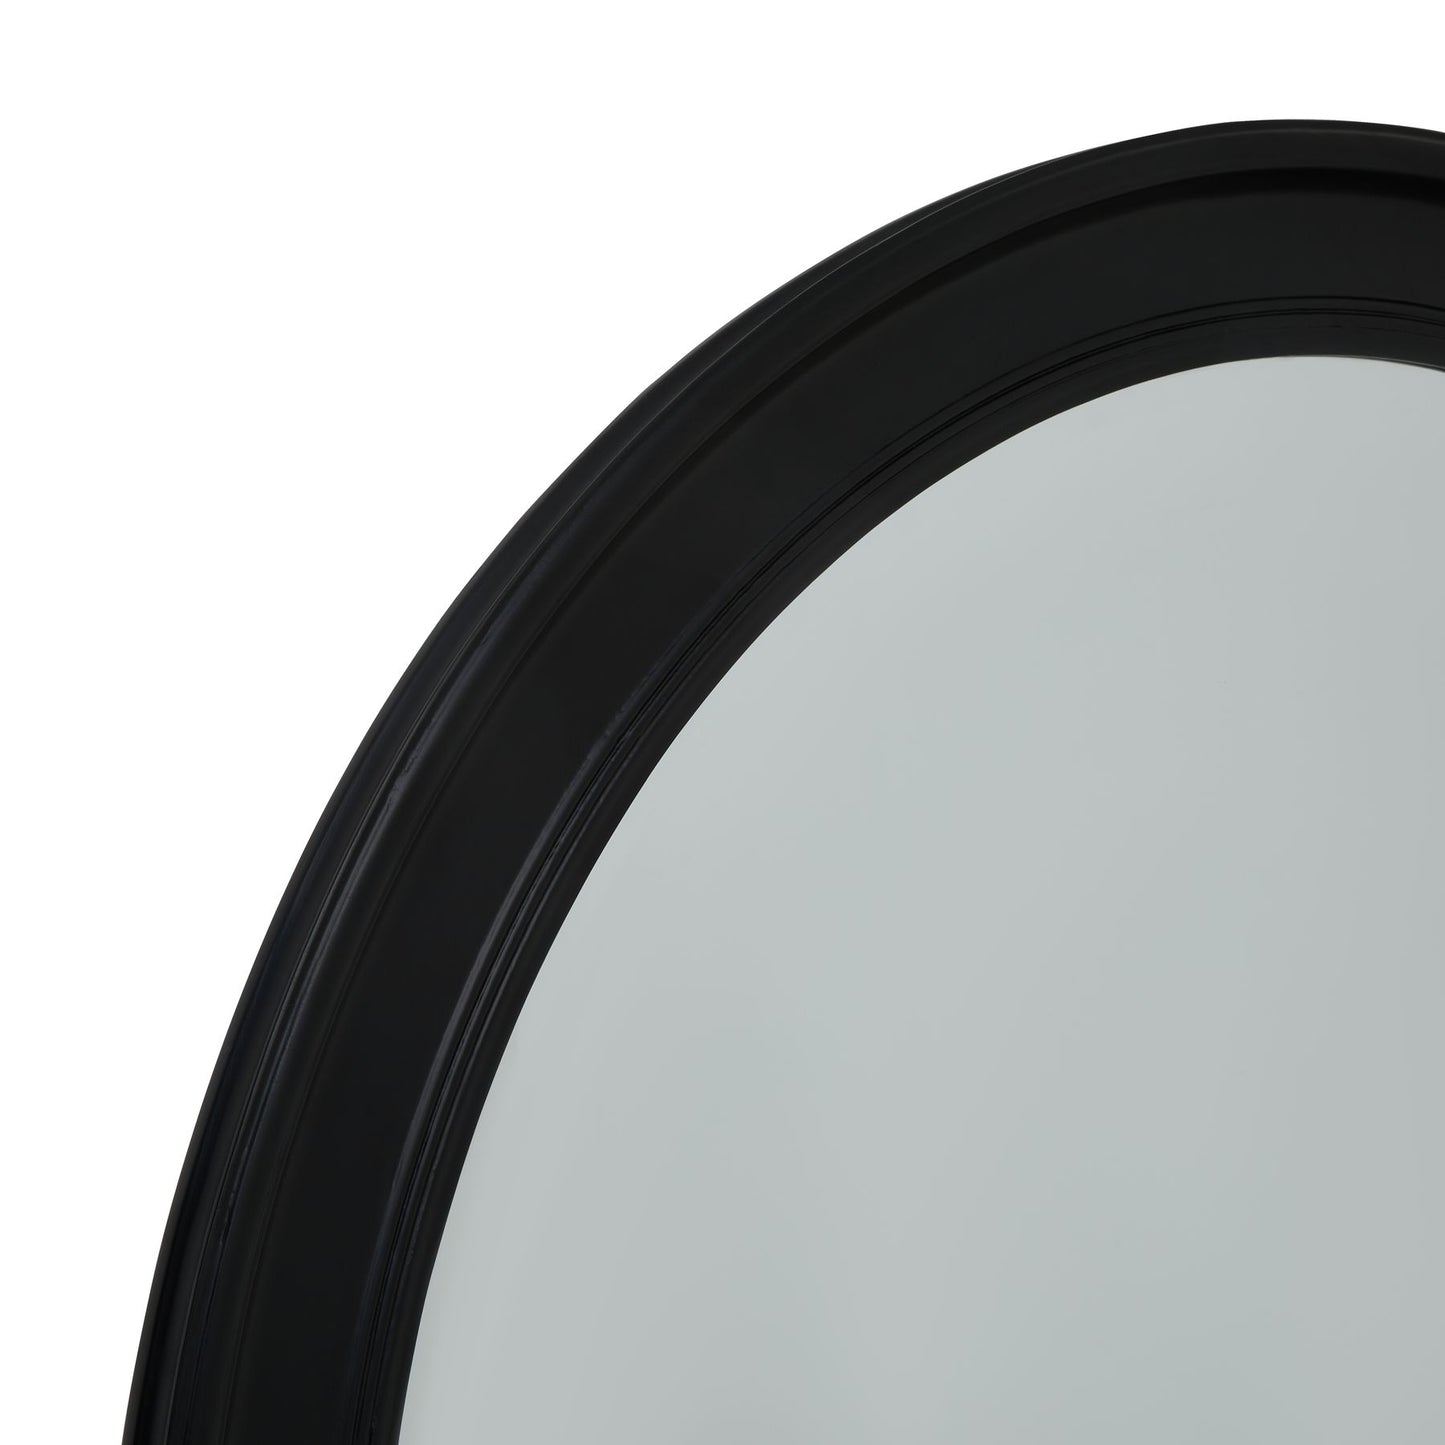 BLACK ROUND WOODEN FRAMED MIRROR (pre order for end of may delivery)